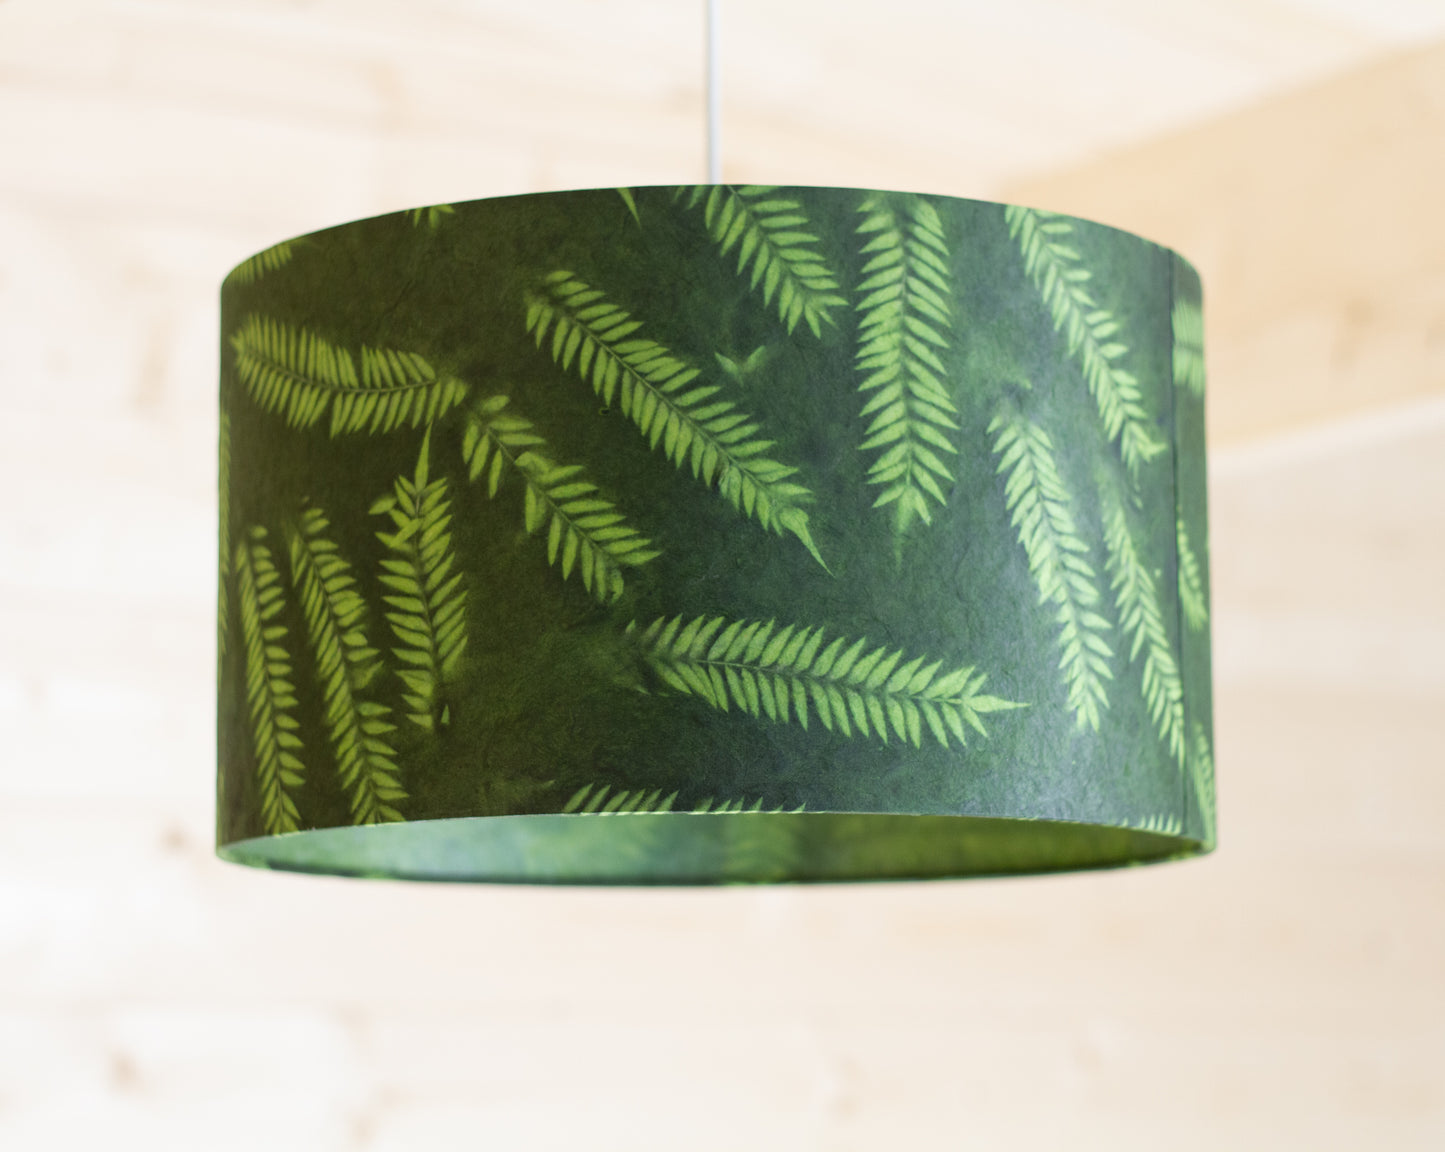 Drum Lamp Shade - P27 - Resistance Dyed Green Fern, 35cm(d) x 20cm(h)